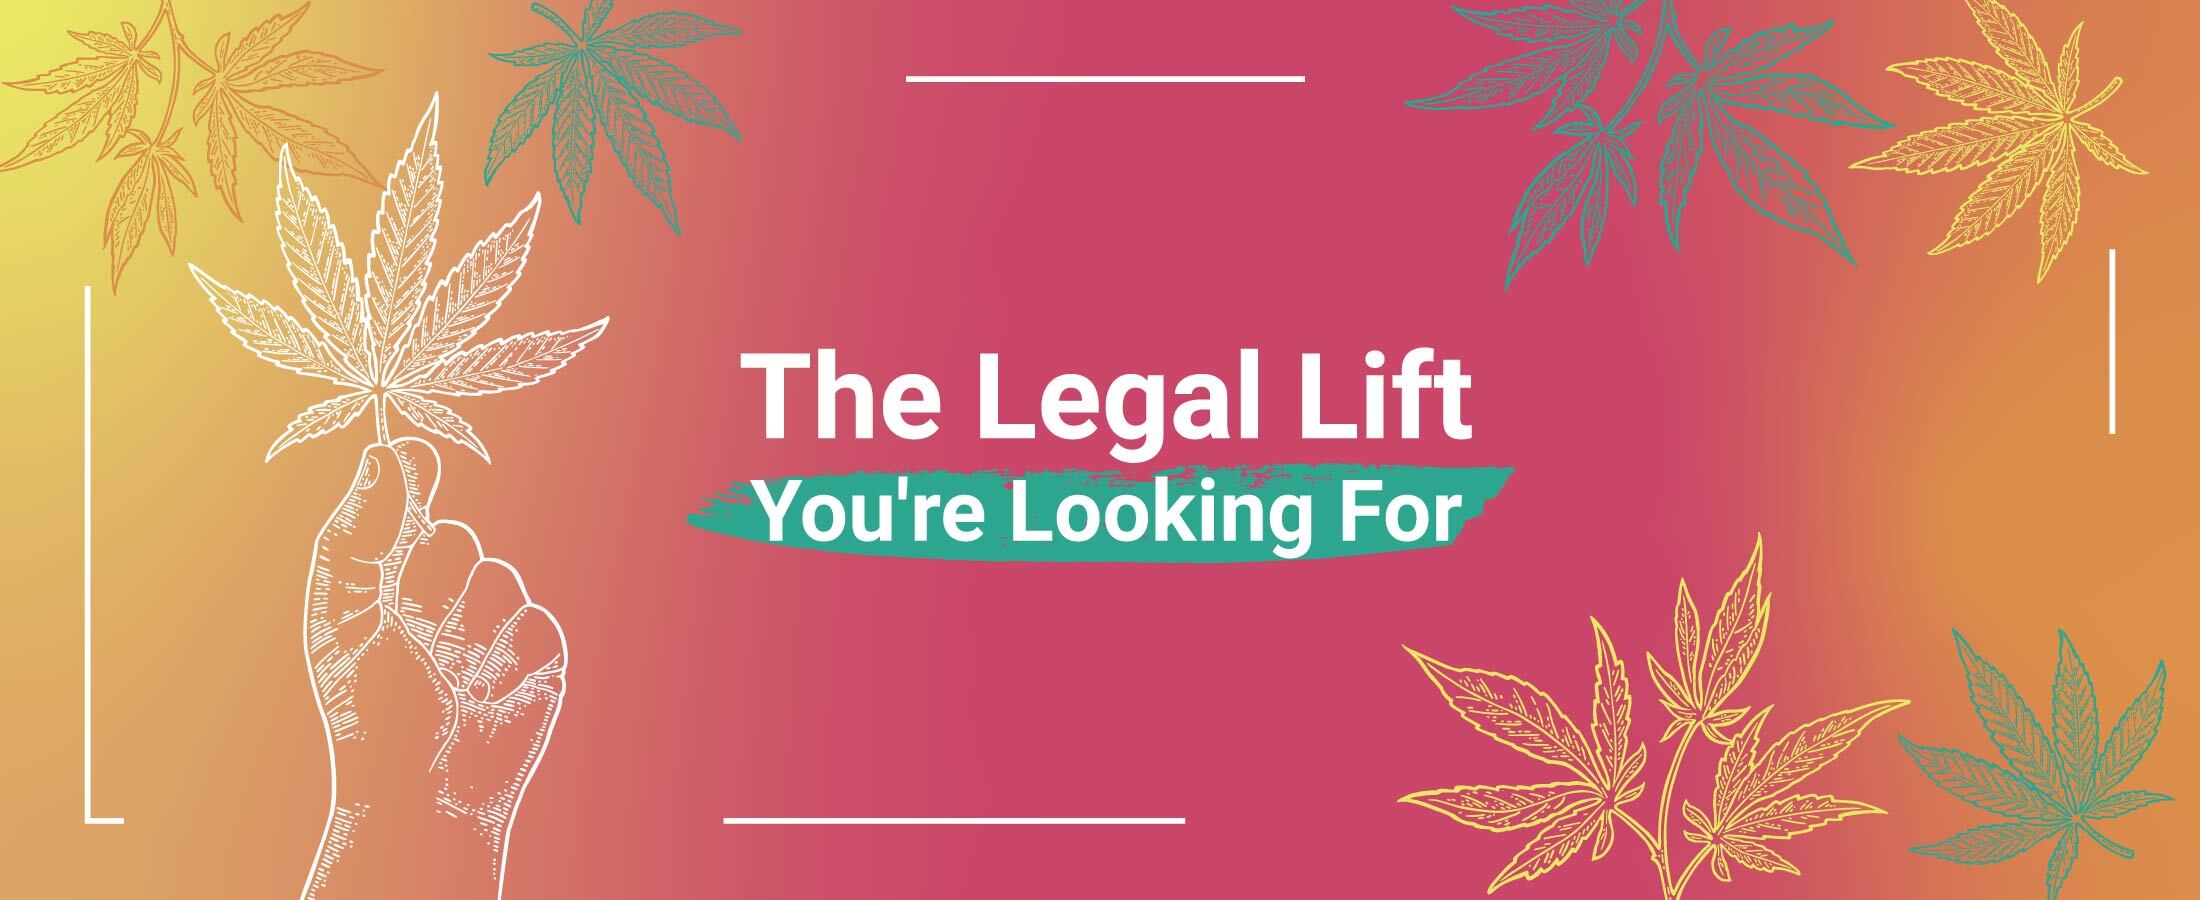 The legal lift you are looking for | Desktop | herbanbud